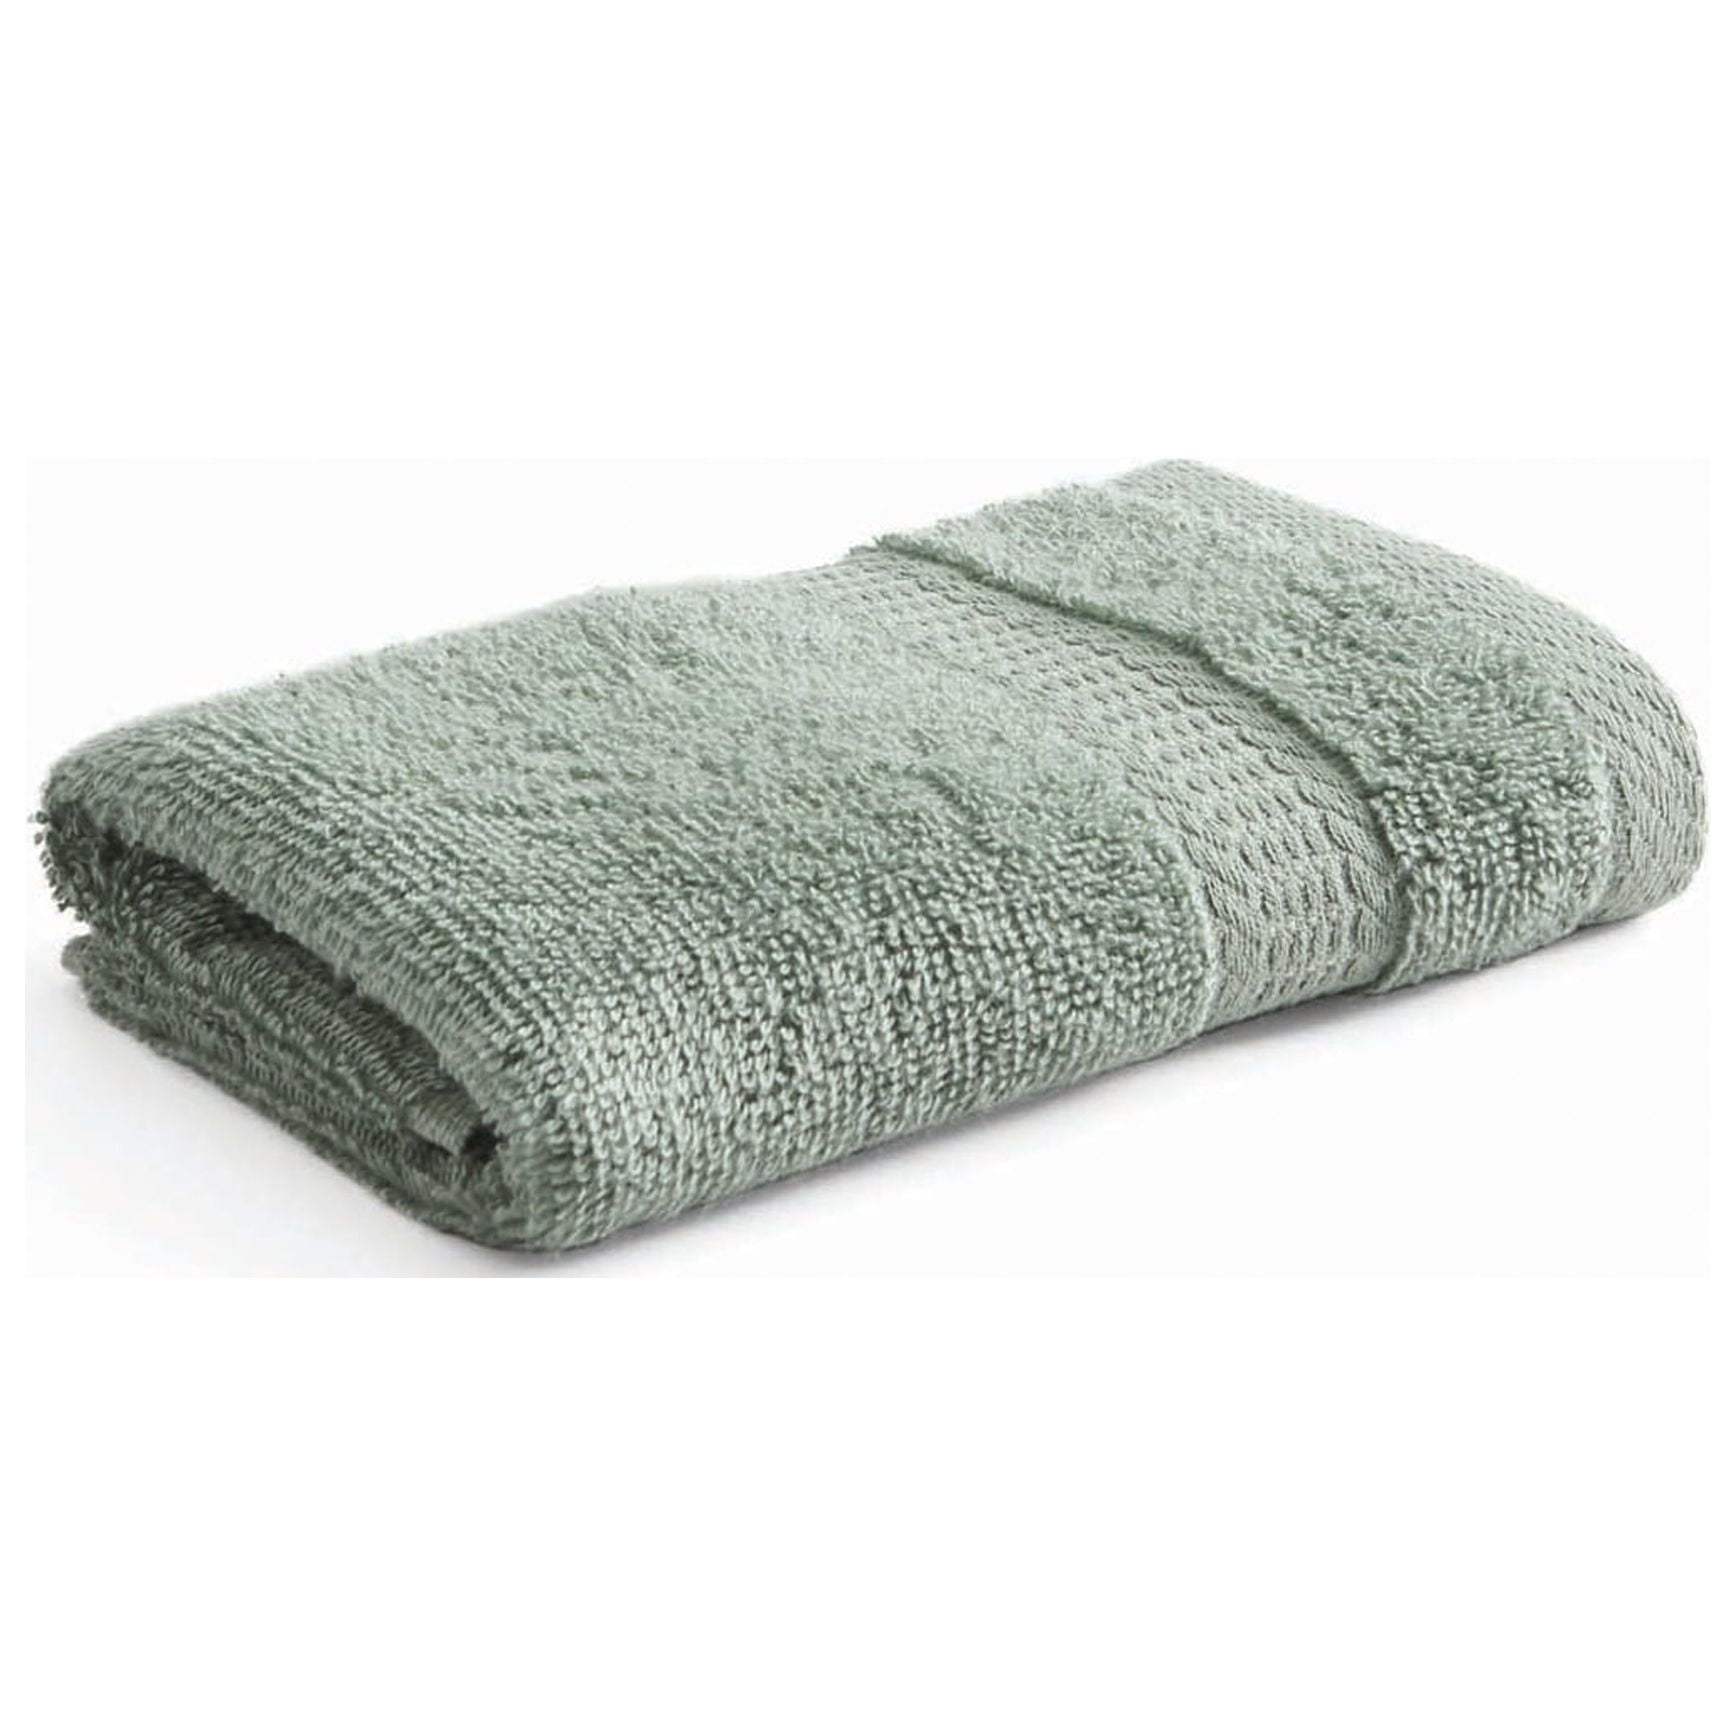 Adult Bath Towels Are Soft and Lint-free, and Men and Women Use